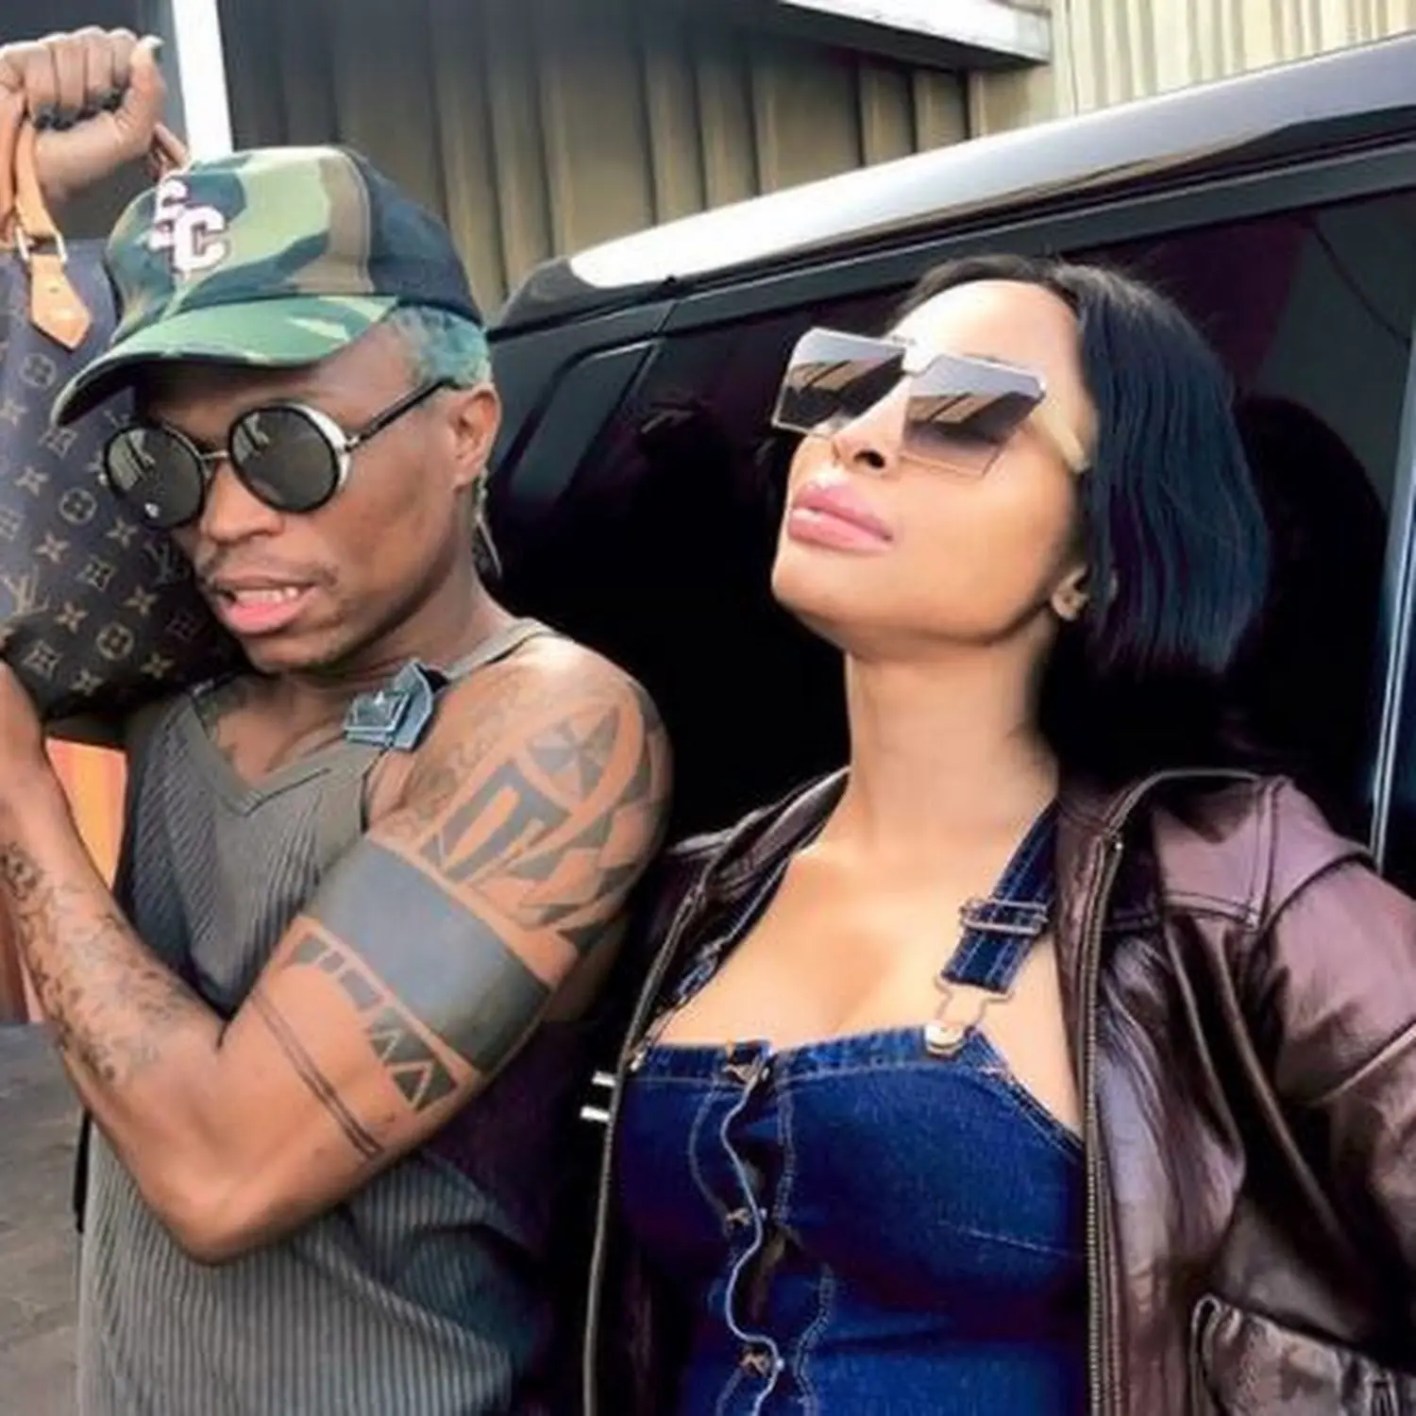 Somizi reveals he flew troubled Khanyi Mbau to Cape Town on New Years’ Eve